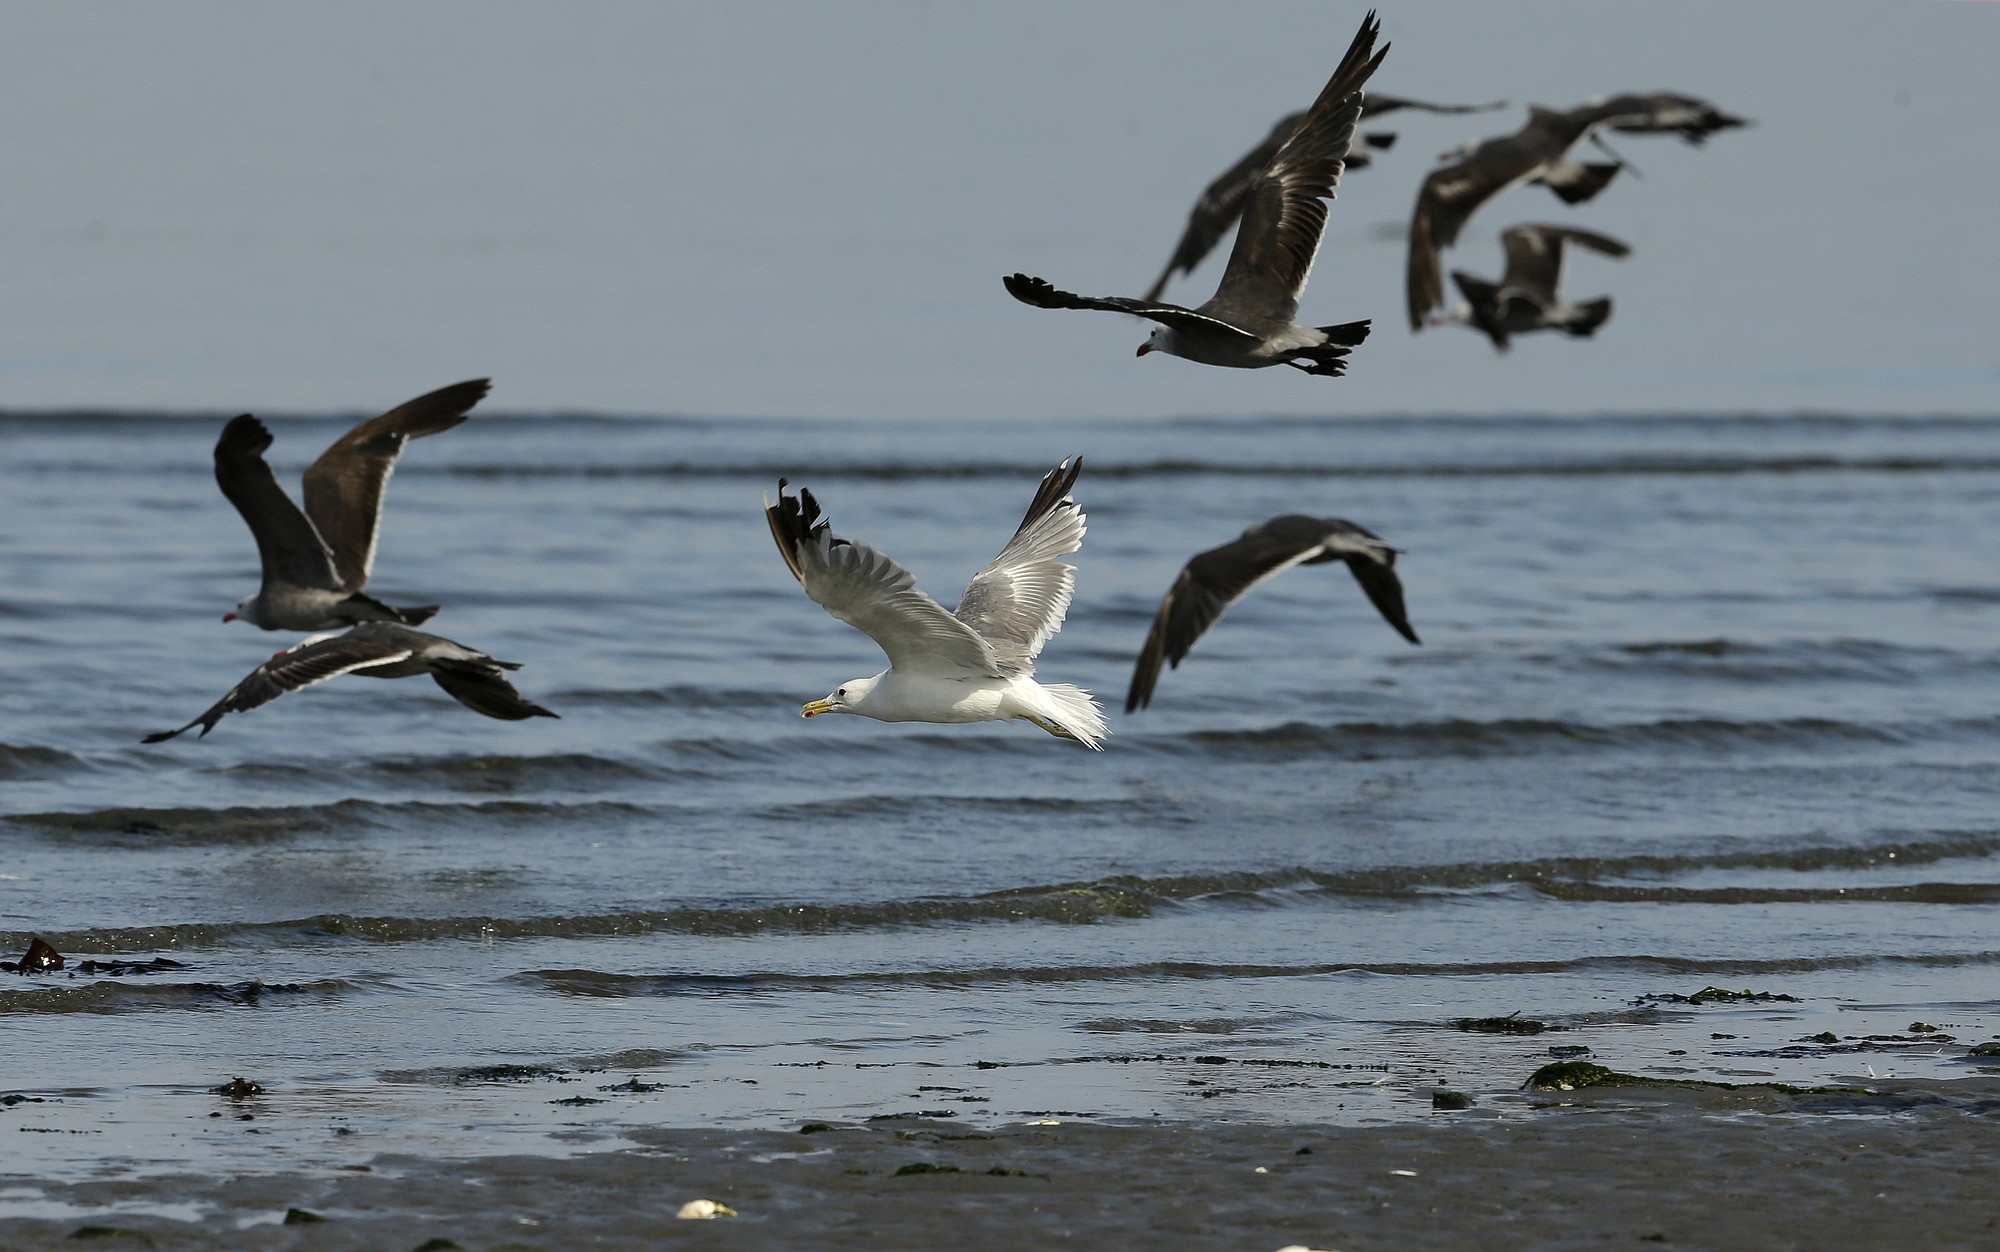 Seagulls fly off Whidbey Island near Clinton.